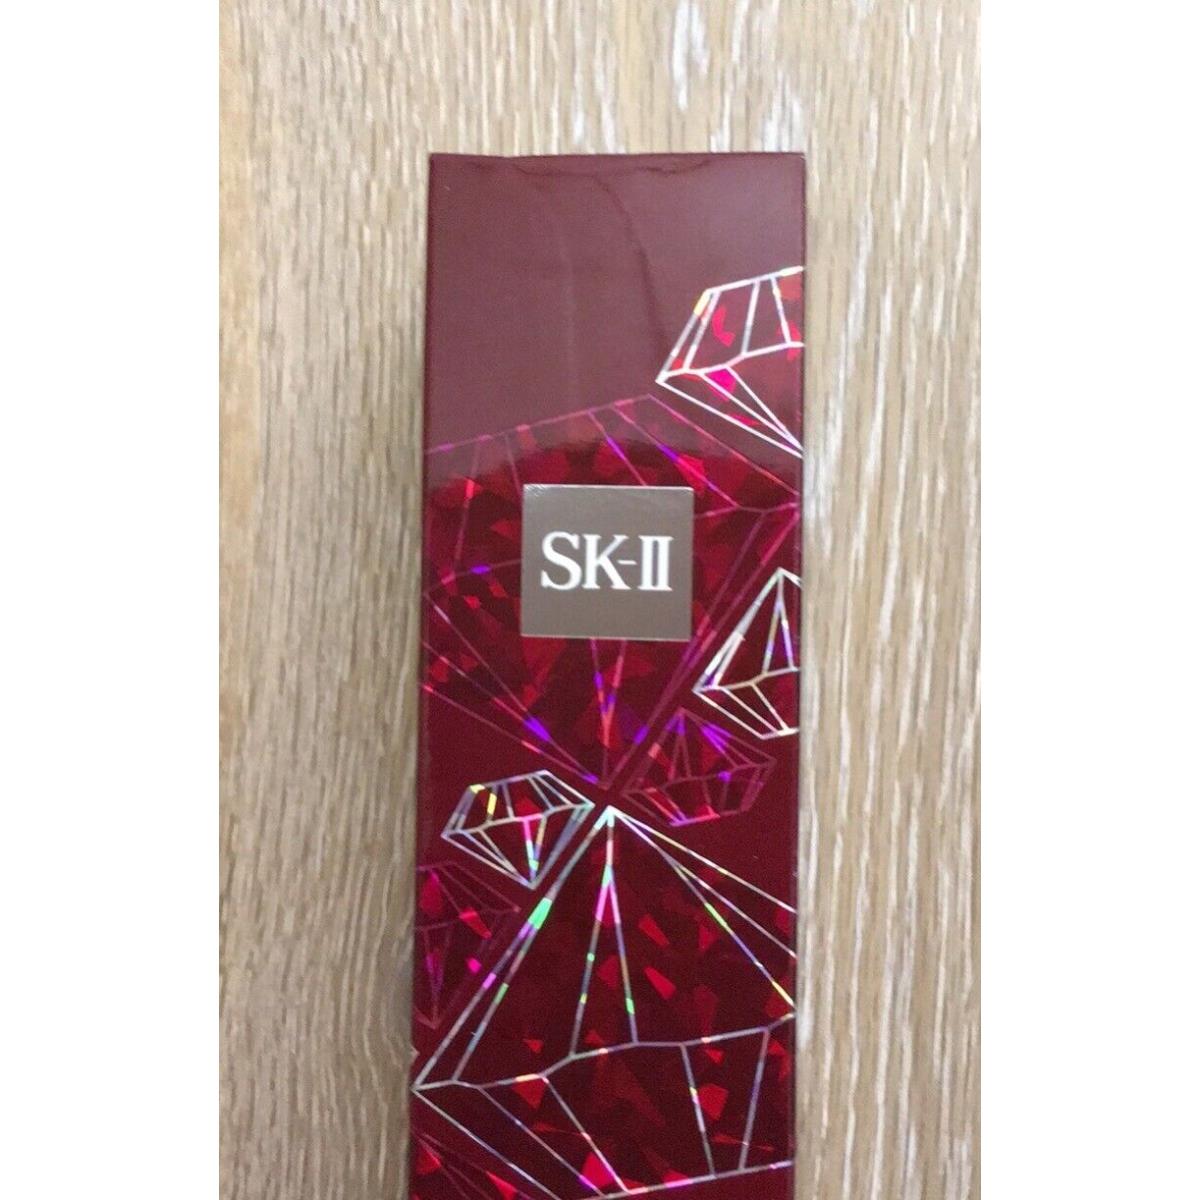 Sk-ii Facial Treatment Essence Limited Edition 2013 Collectible 7.2 oz